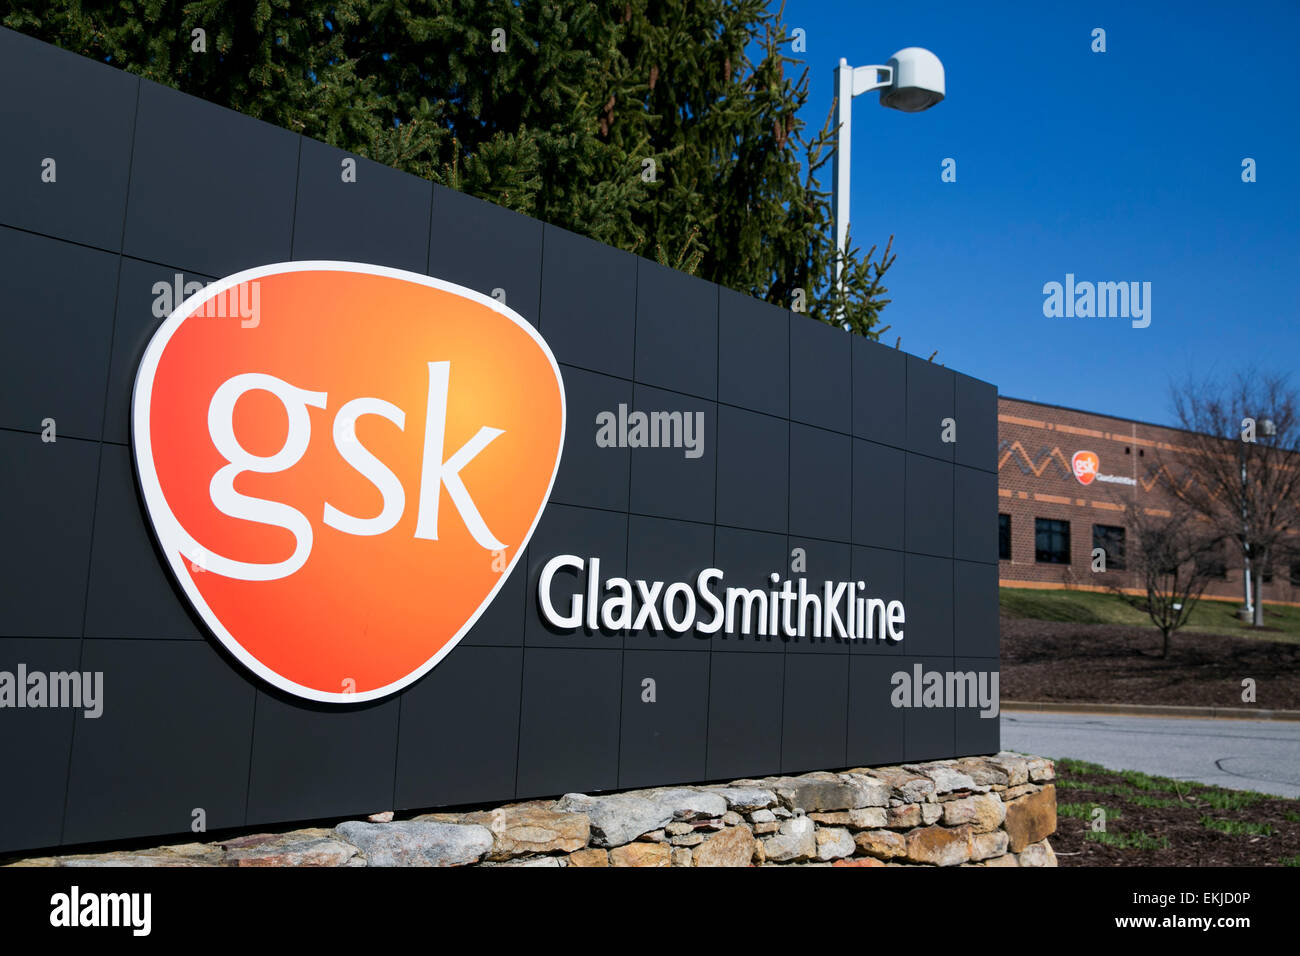 A facility operated by the pharmaceutical firm GlaxoSmithKline. Stock Photo